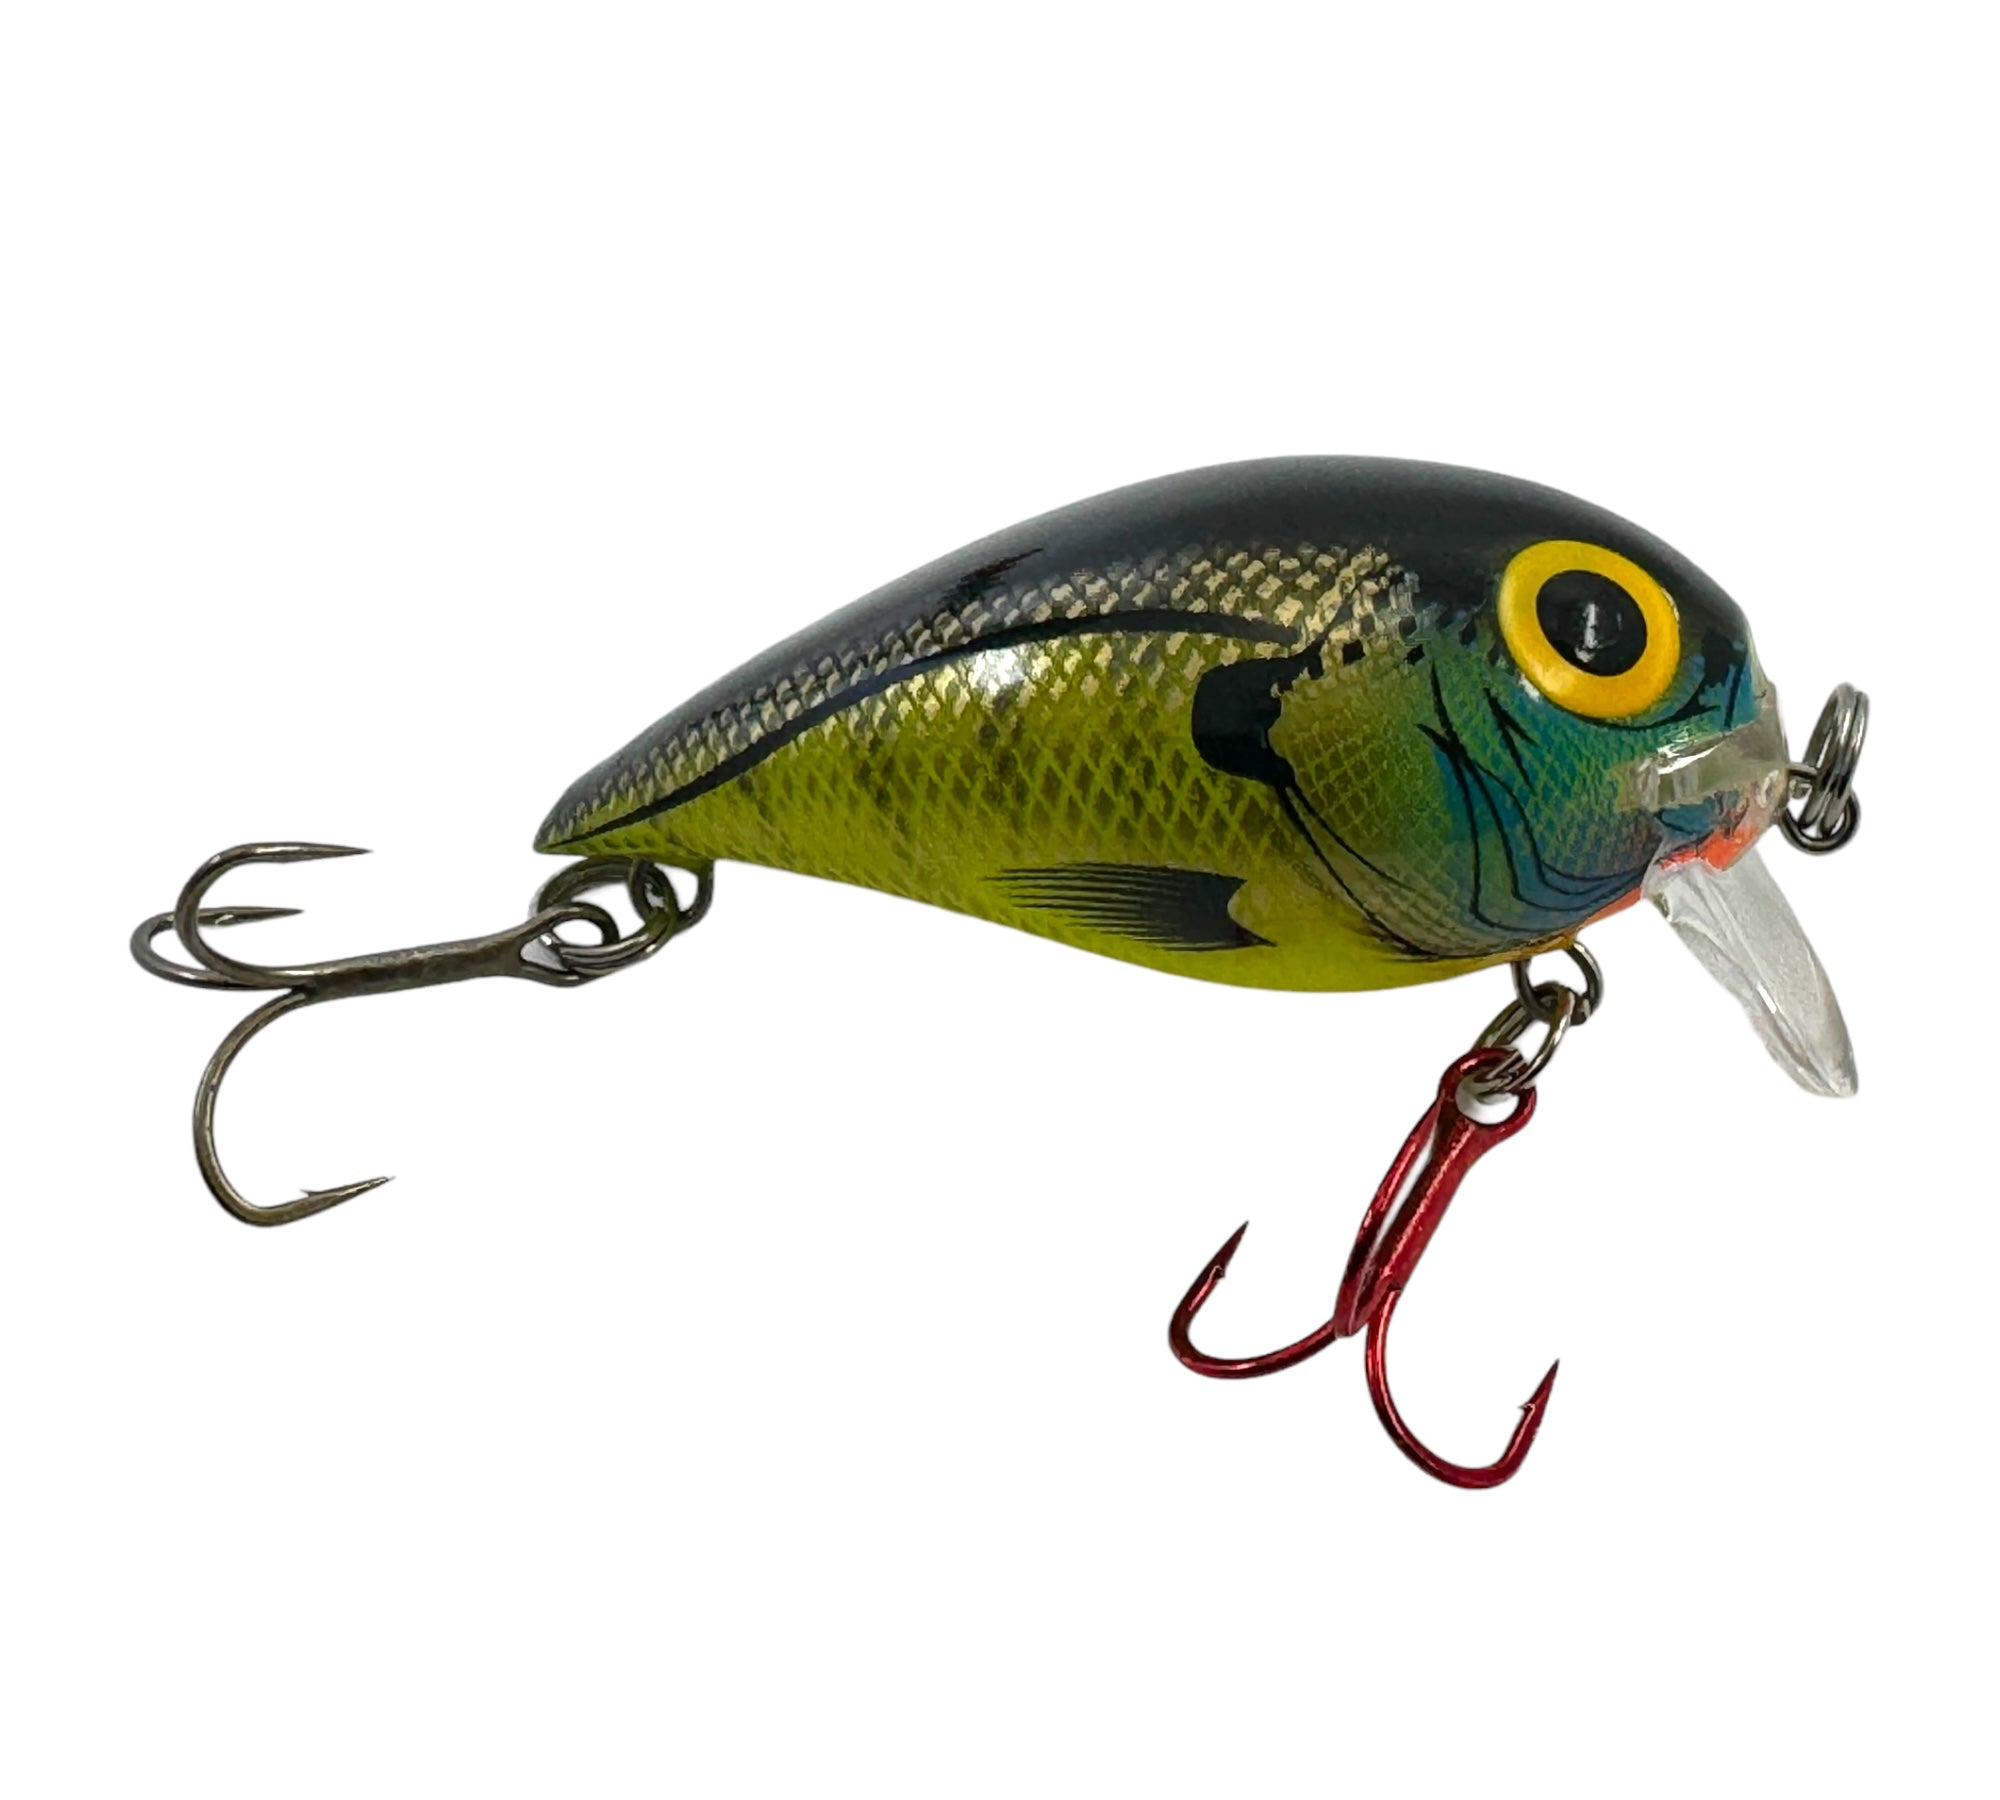 STORM LURES SUBWART Size 5 Vintage Fishing Lure • BLUEGILL – Toad